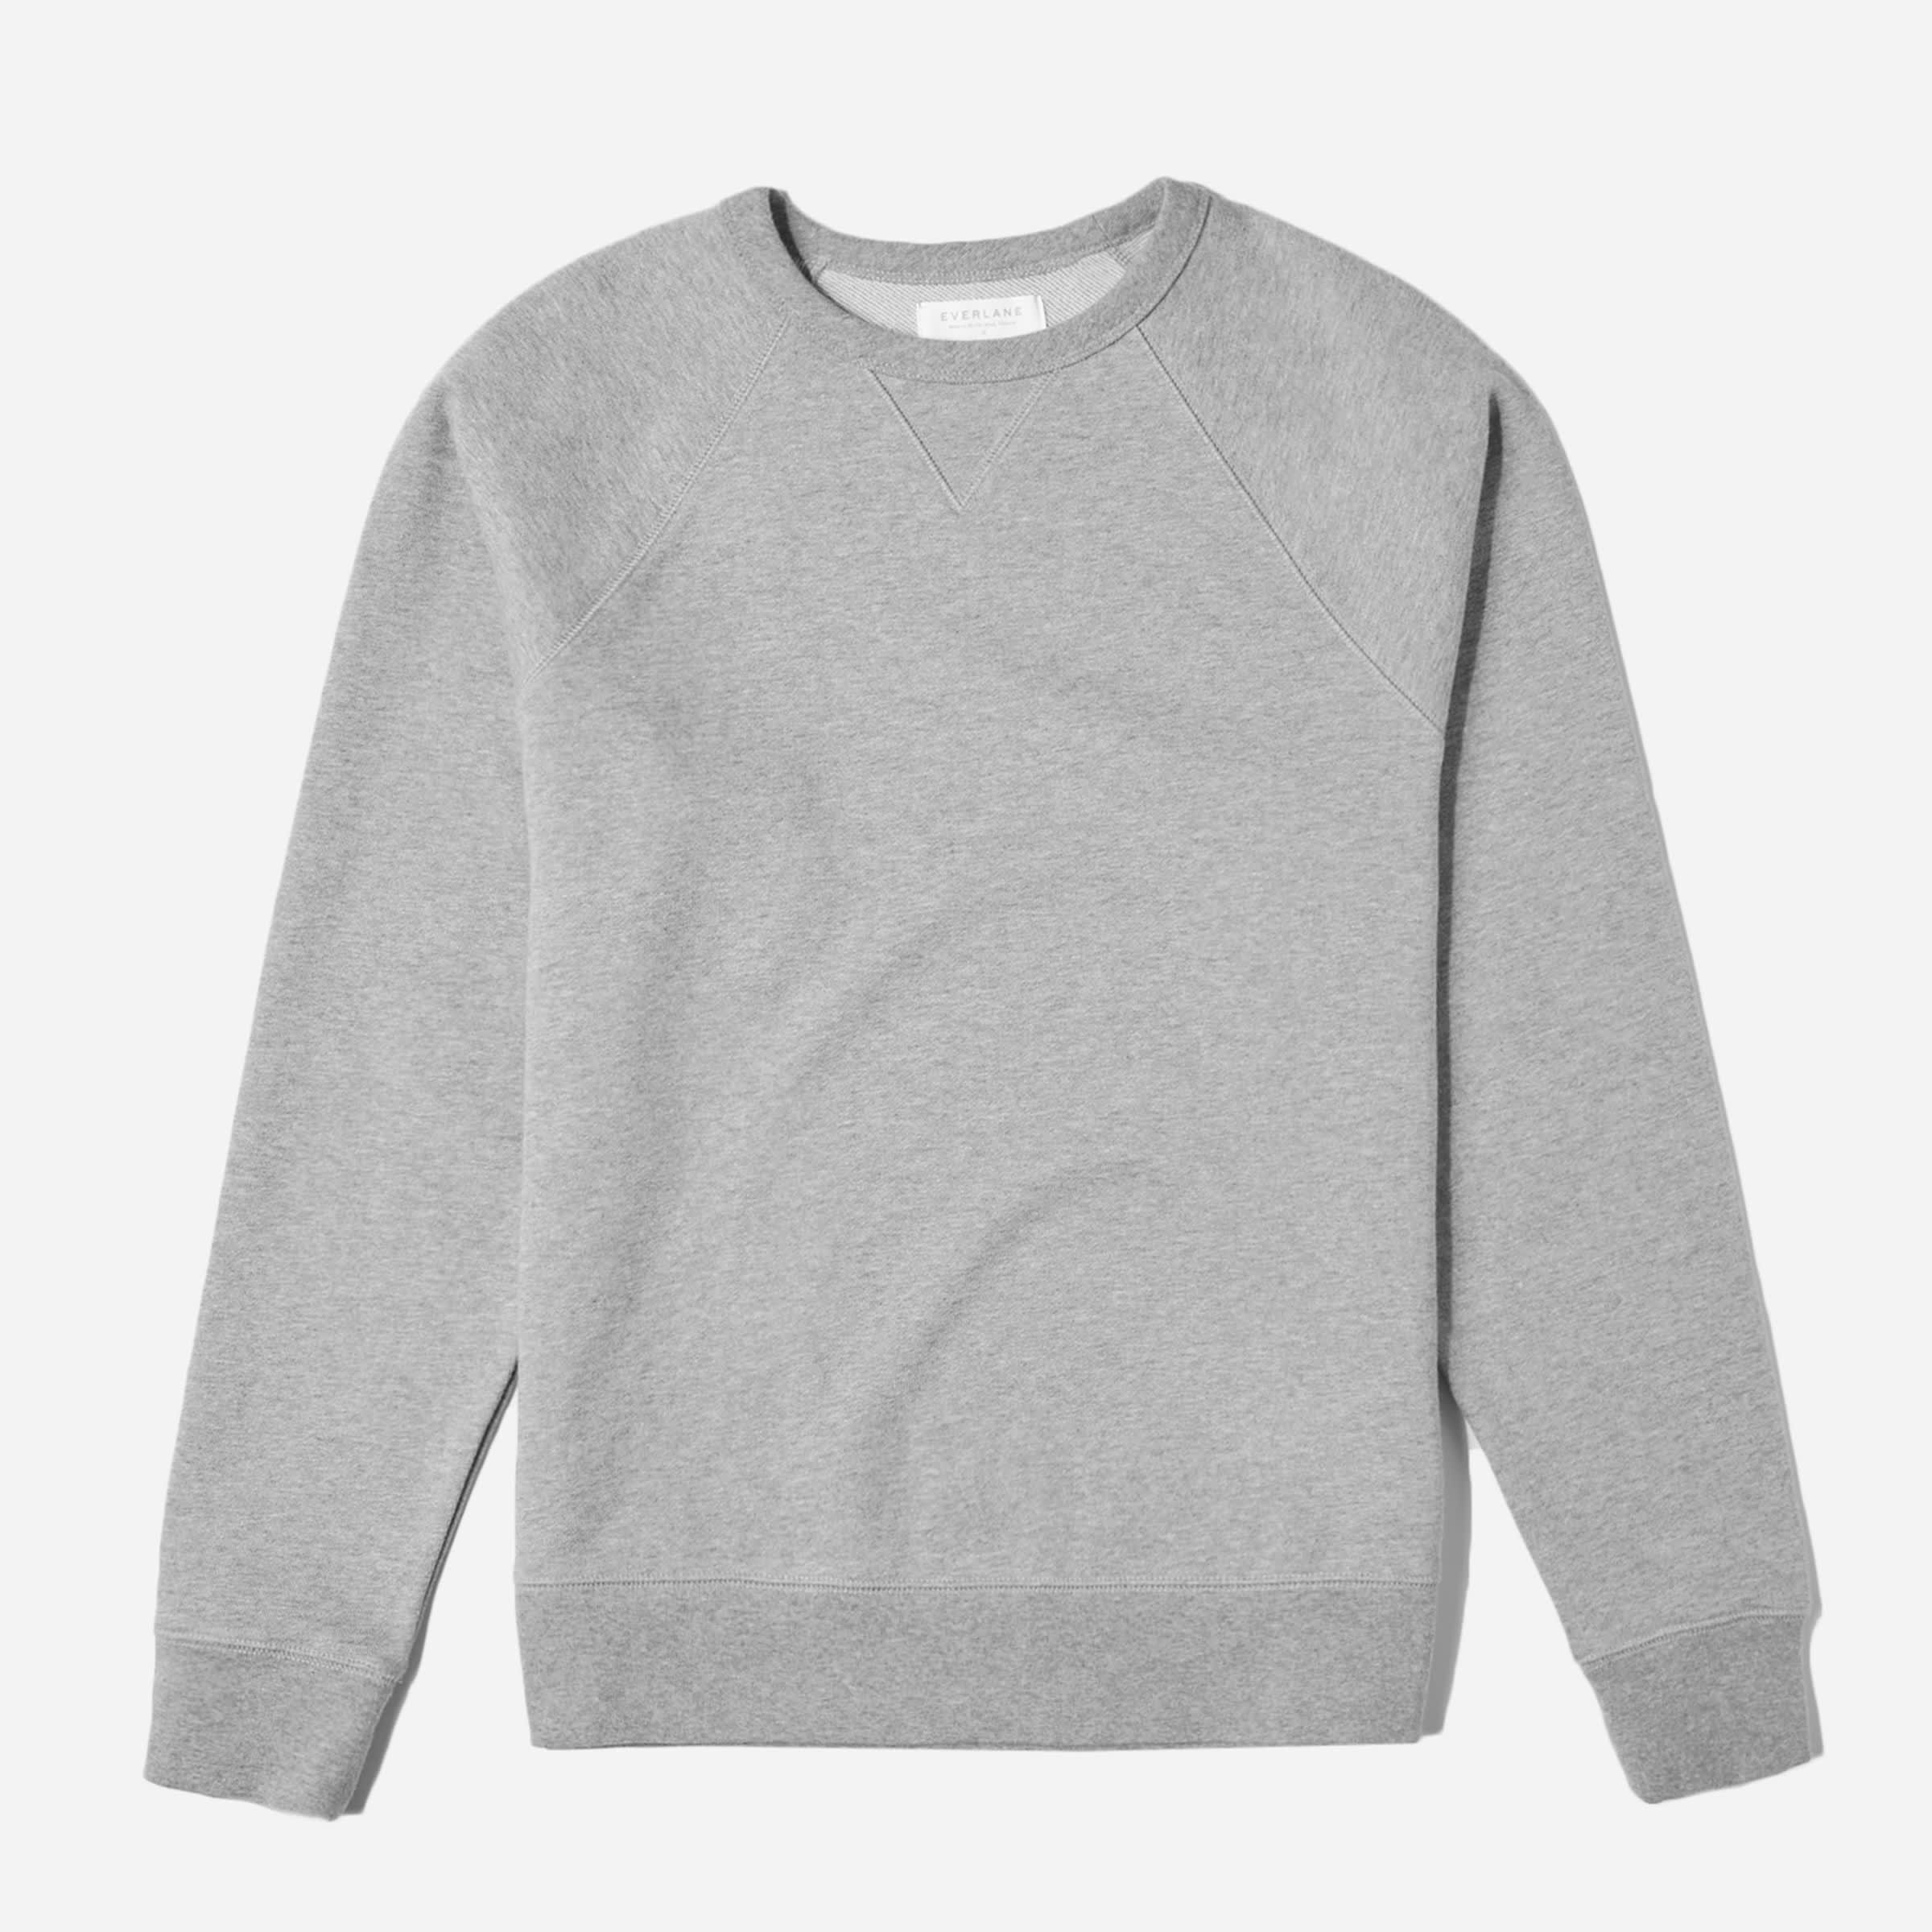 The Unisex French Terry Crew by EVERLANE